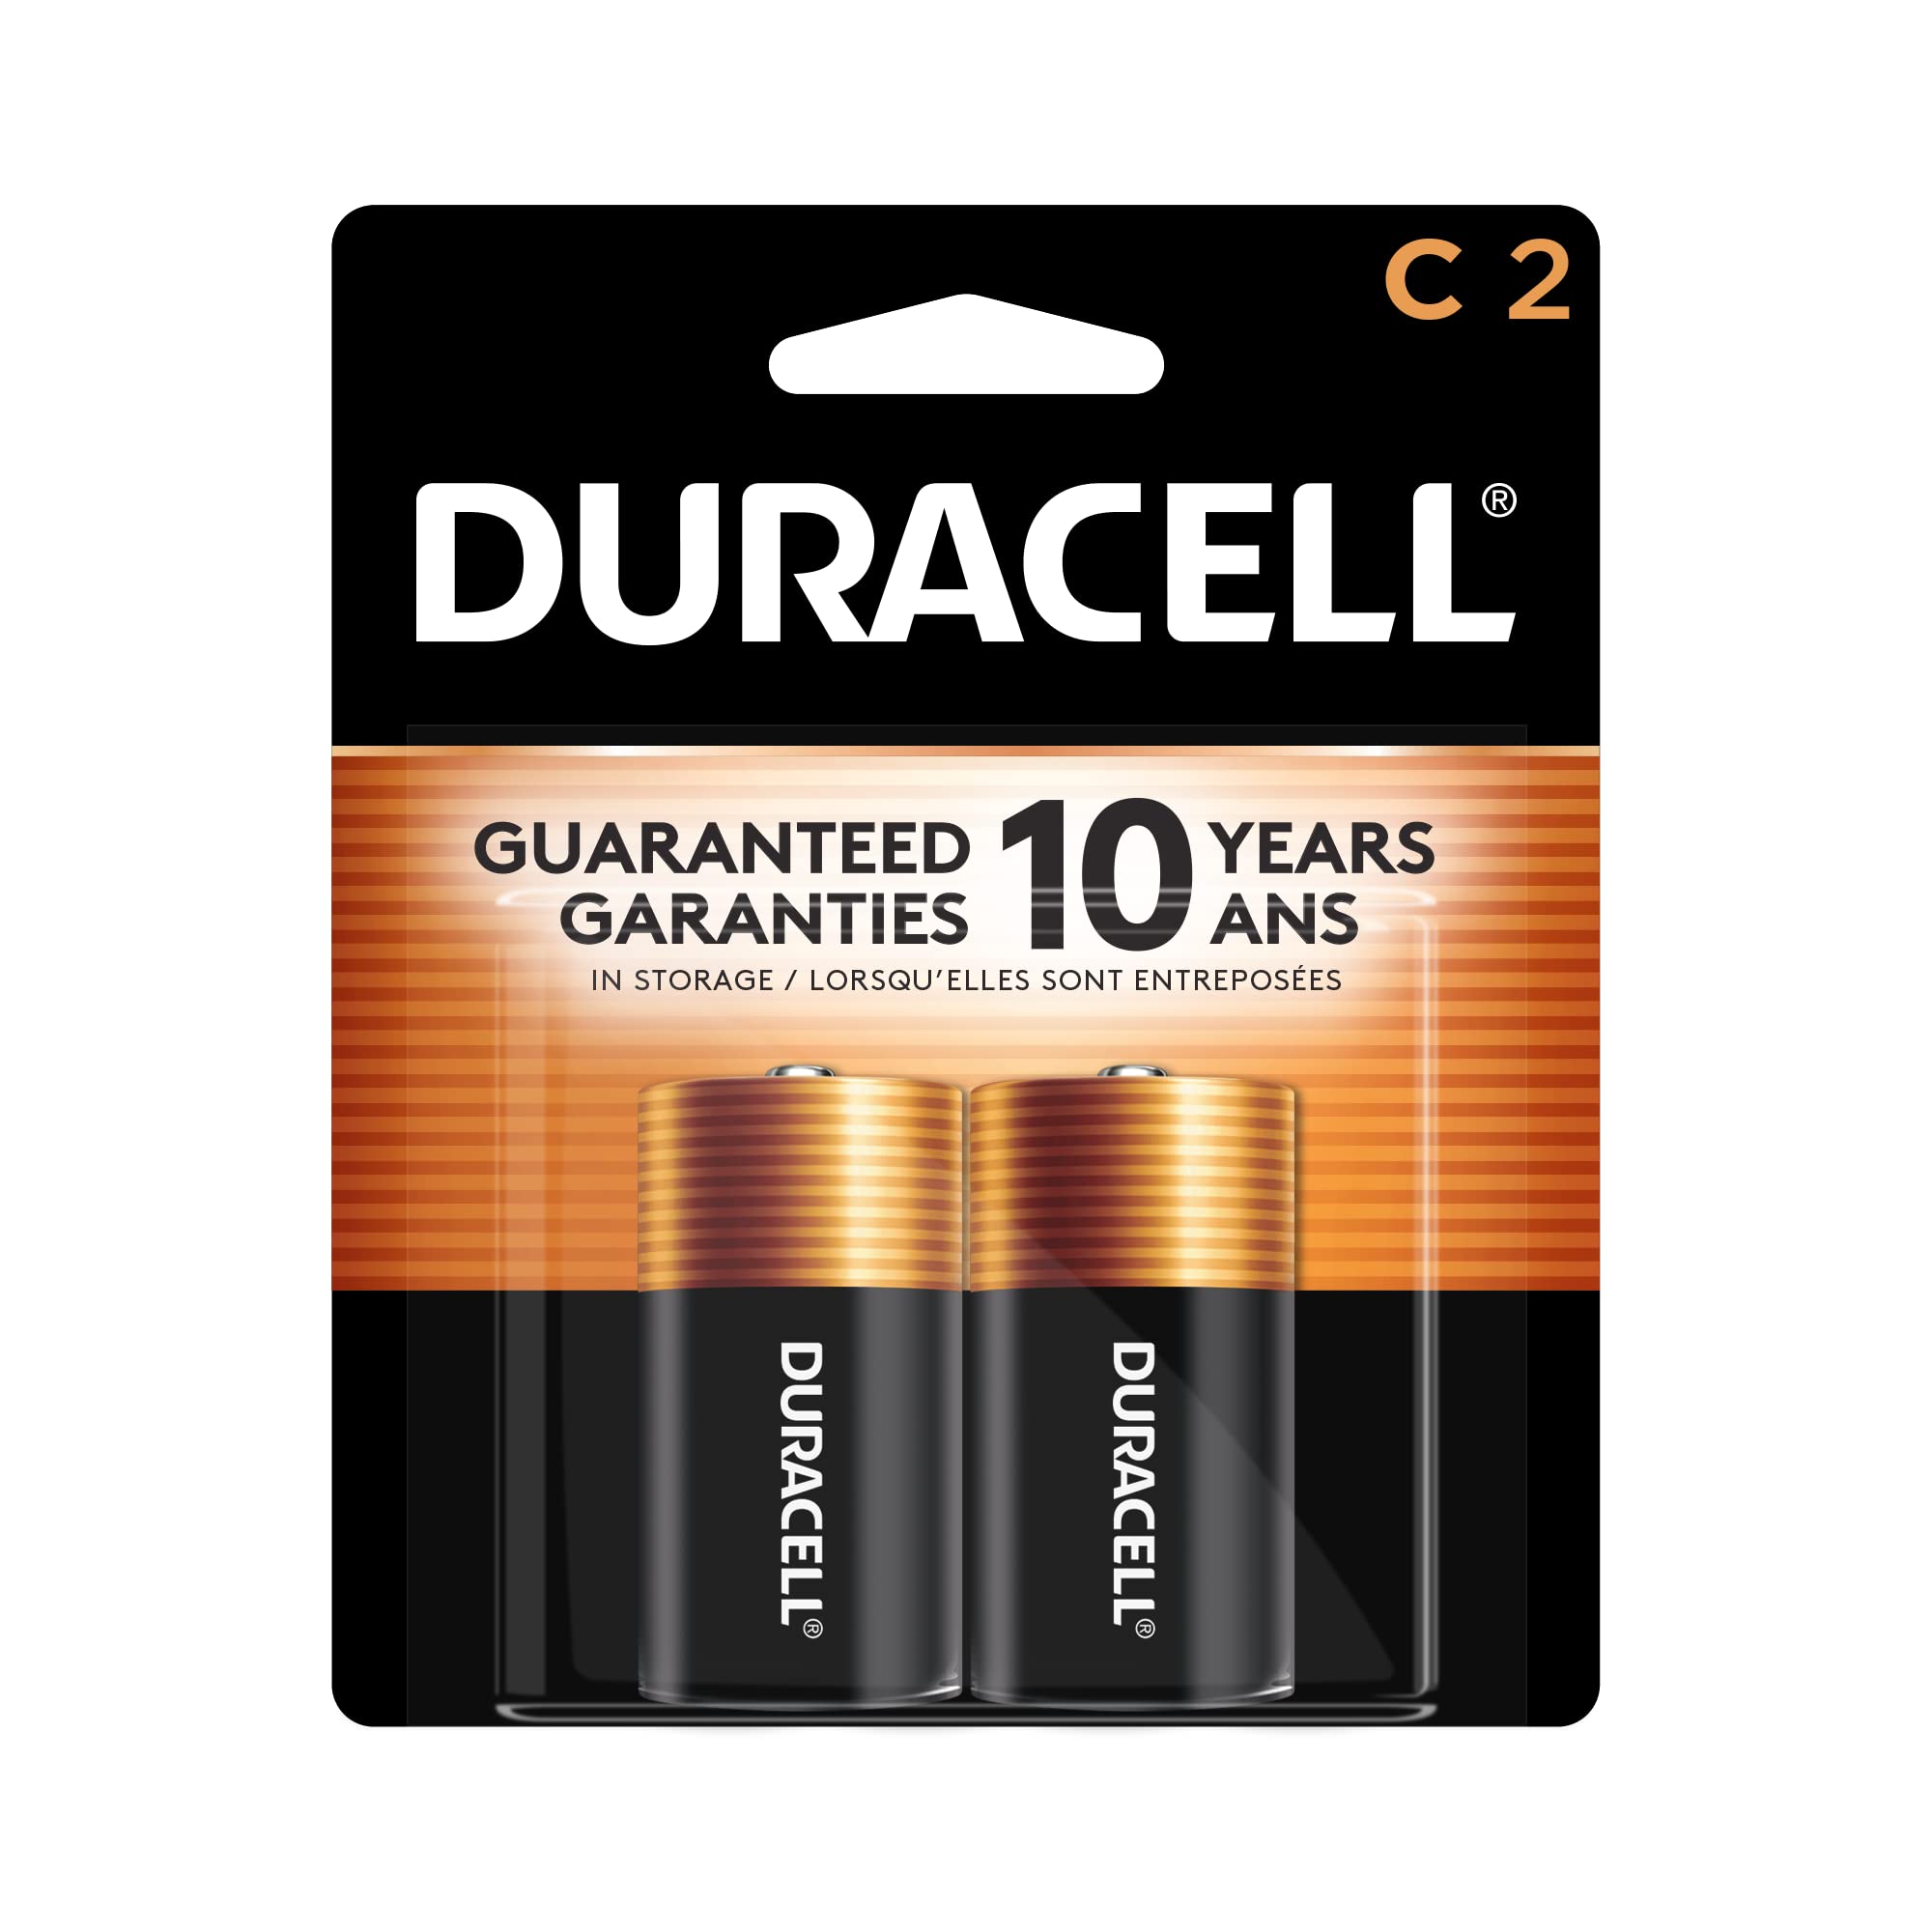 DURACELL Coppertop 1.5V Size C Alkaline Battery, (Pack of 6) - image 1 of 5